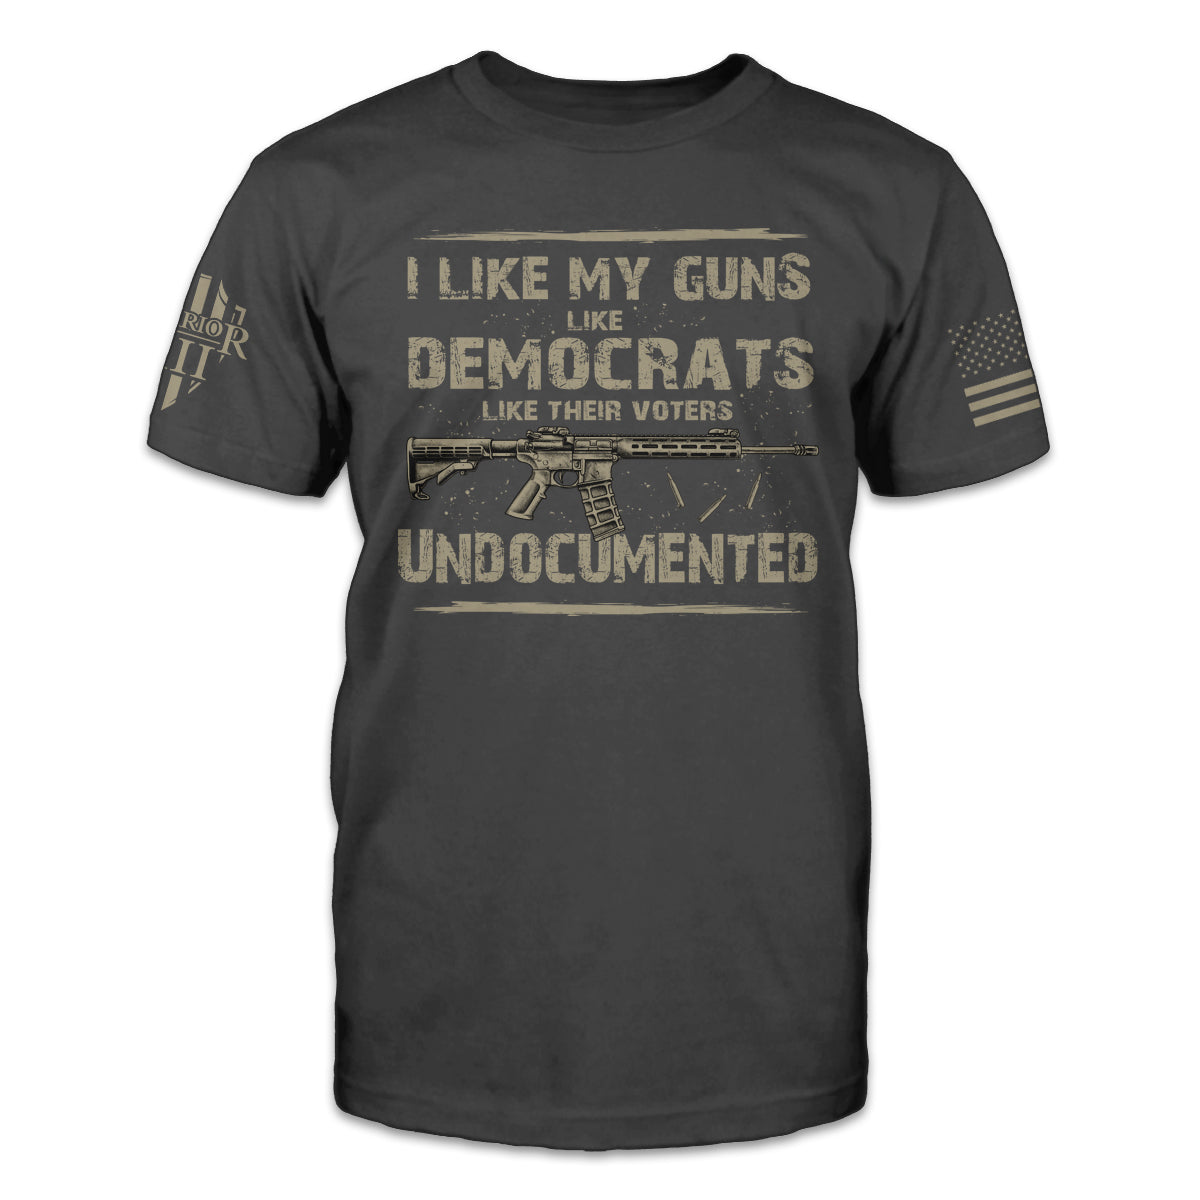 An asphalt-gray t-shirt which has a design on the front "I like my guns like democrats like their voters: undocumented," with an AR-15 rifle.